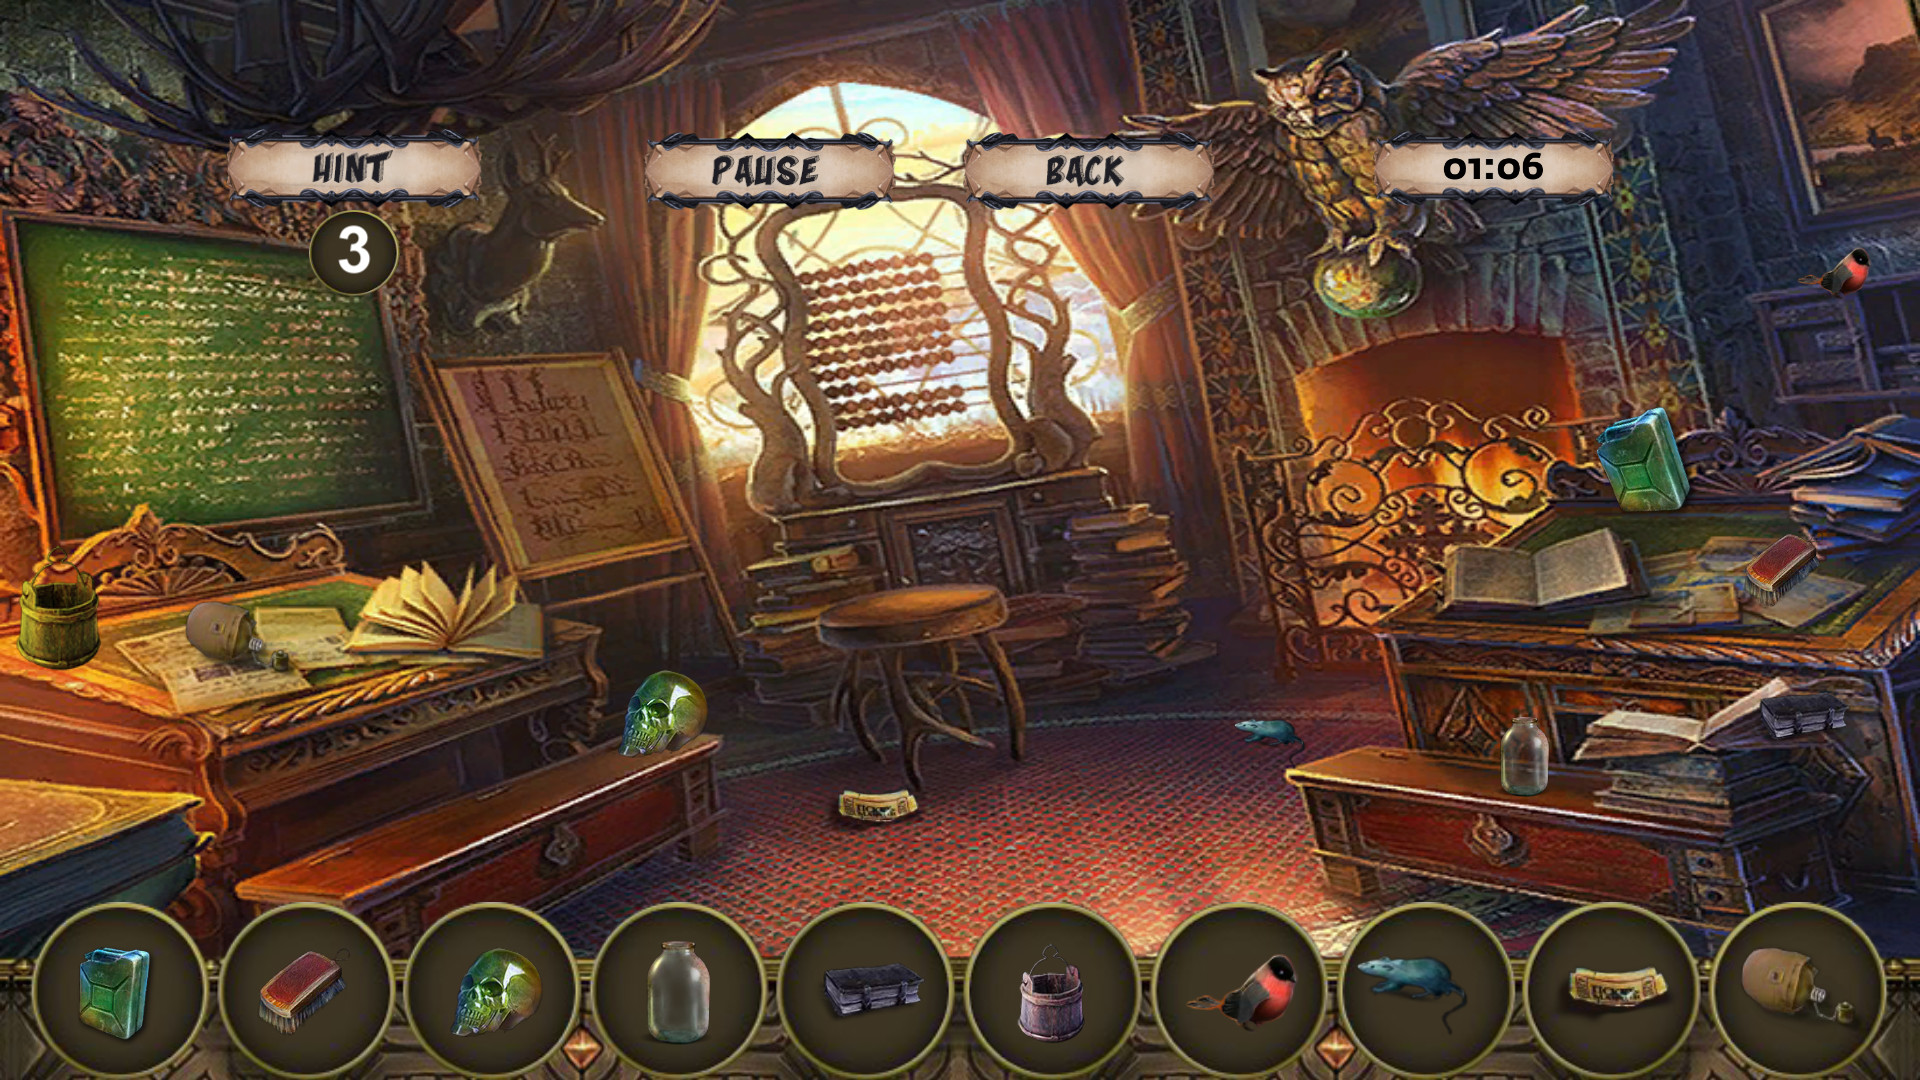 Unexposed: Hidden Object Mystery Game instal the new version for windows